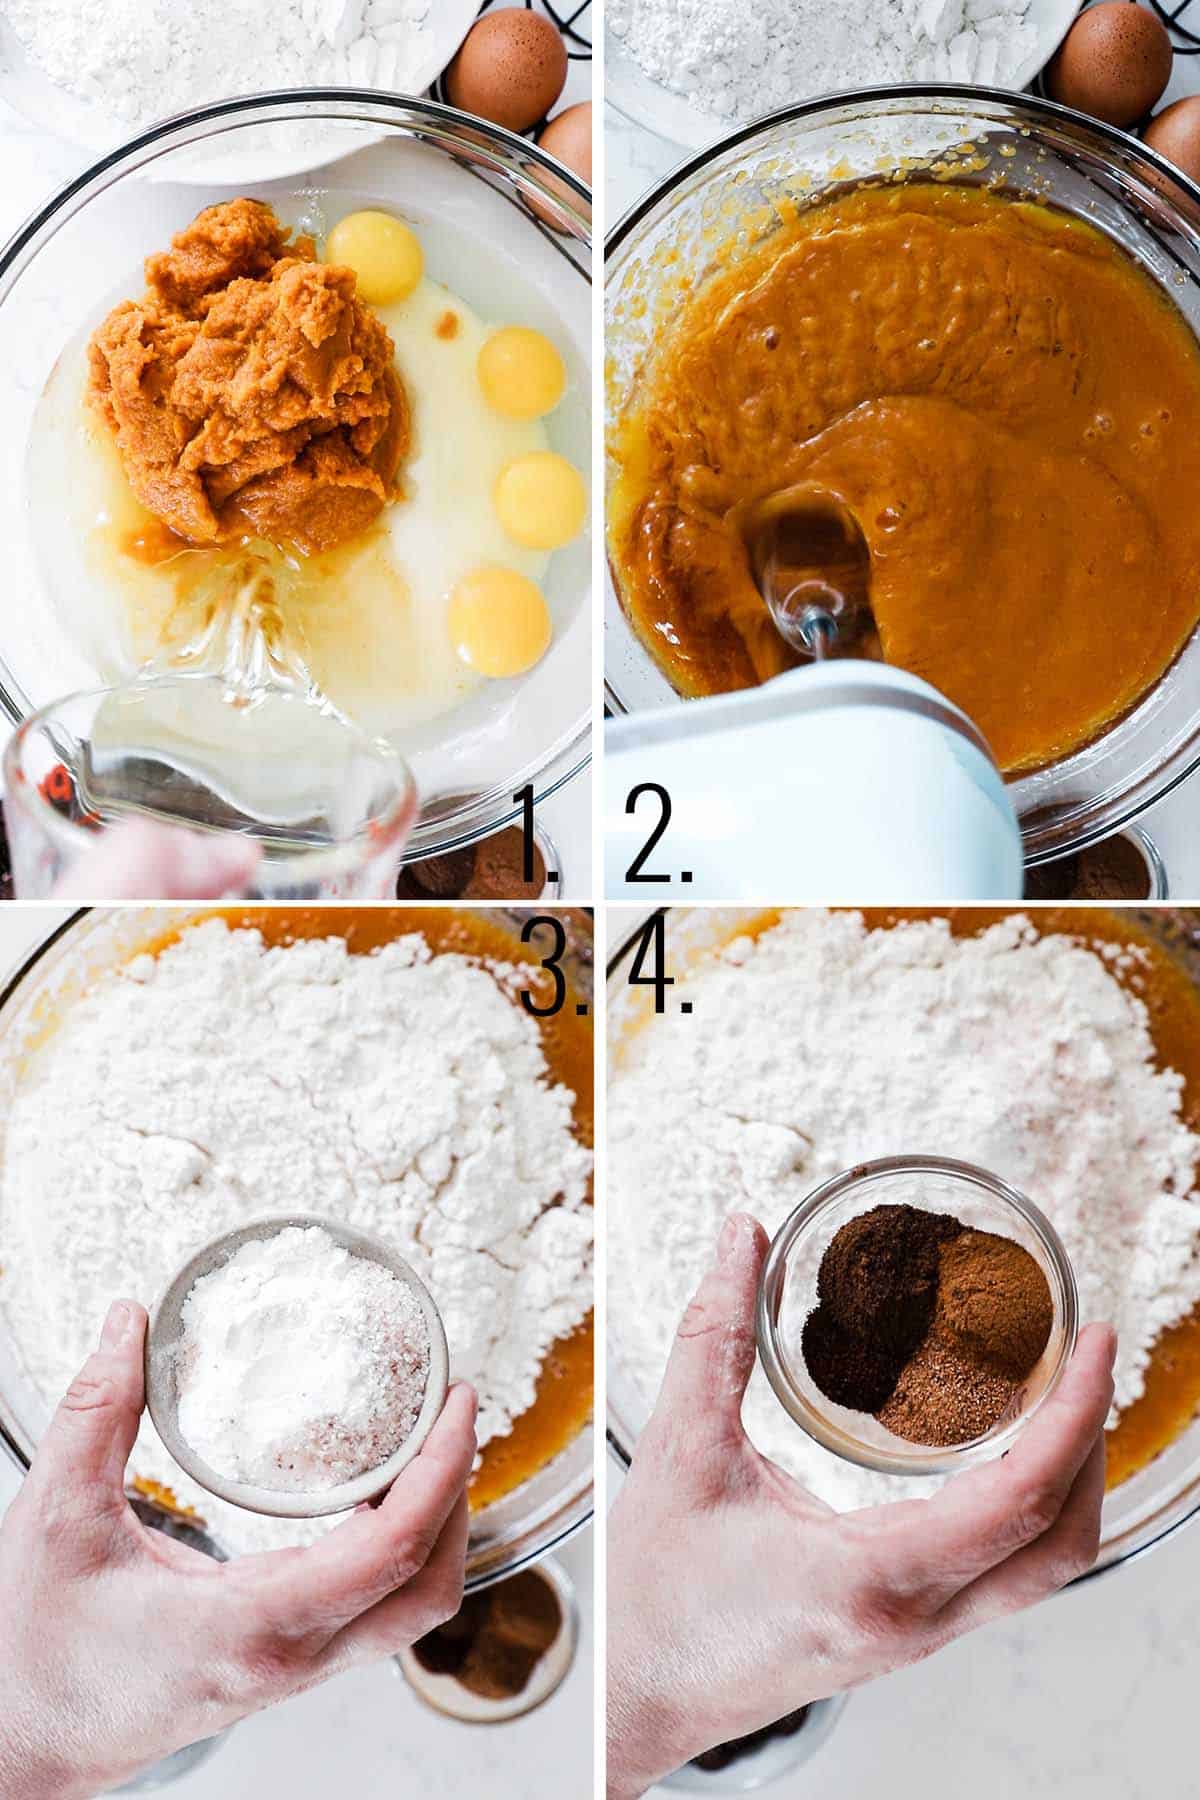 sugar, oil, eggs, and pumpkin being mixed in a bowl. Flour being added with leaven.